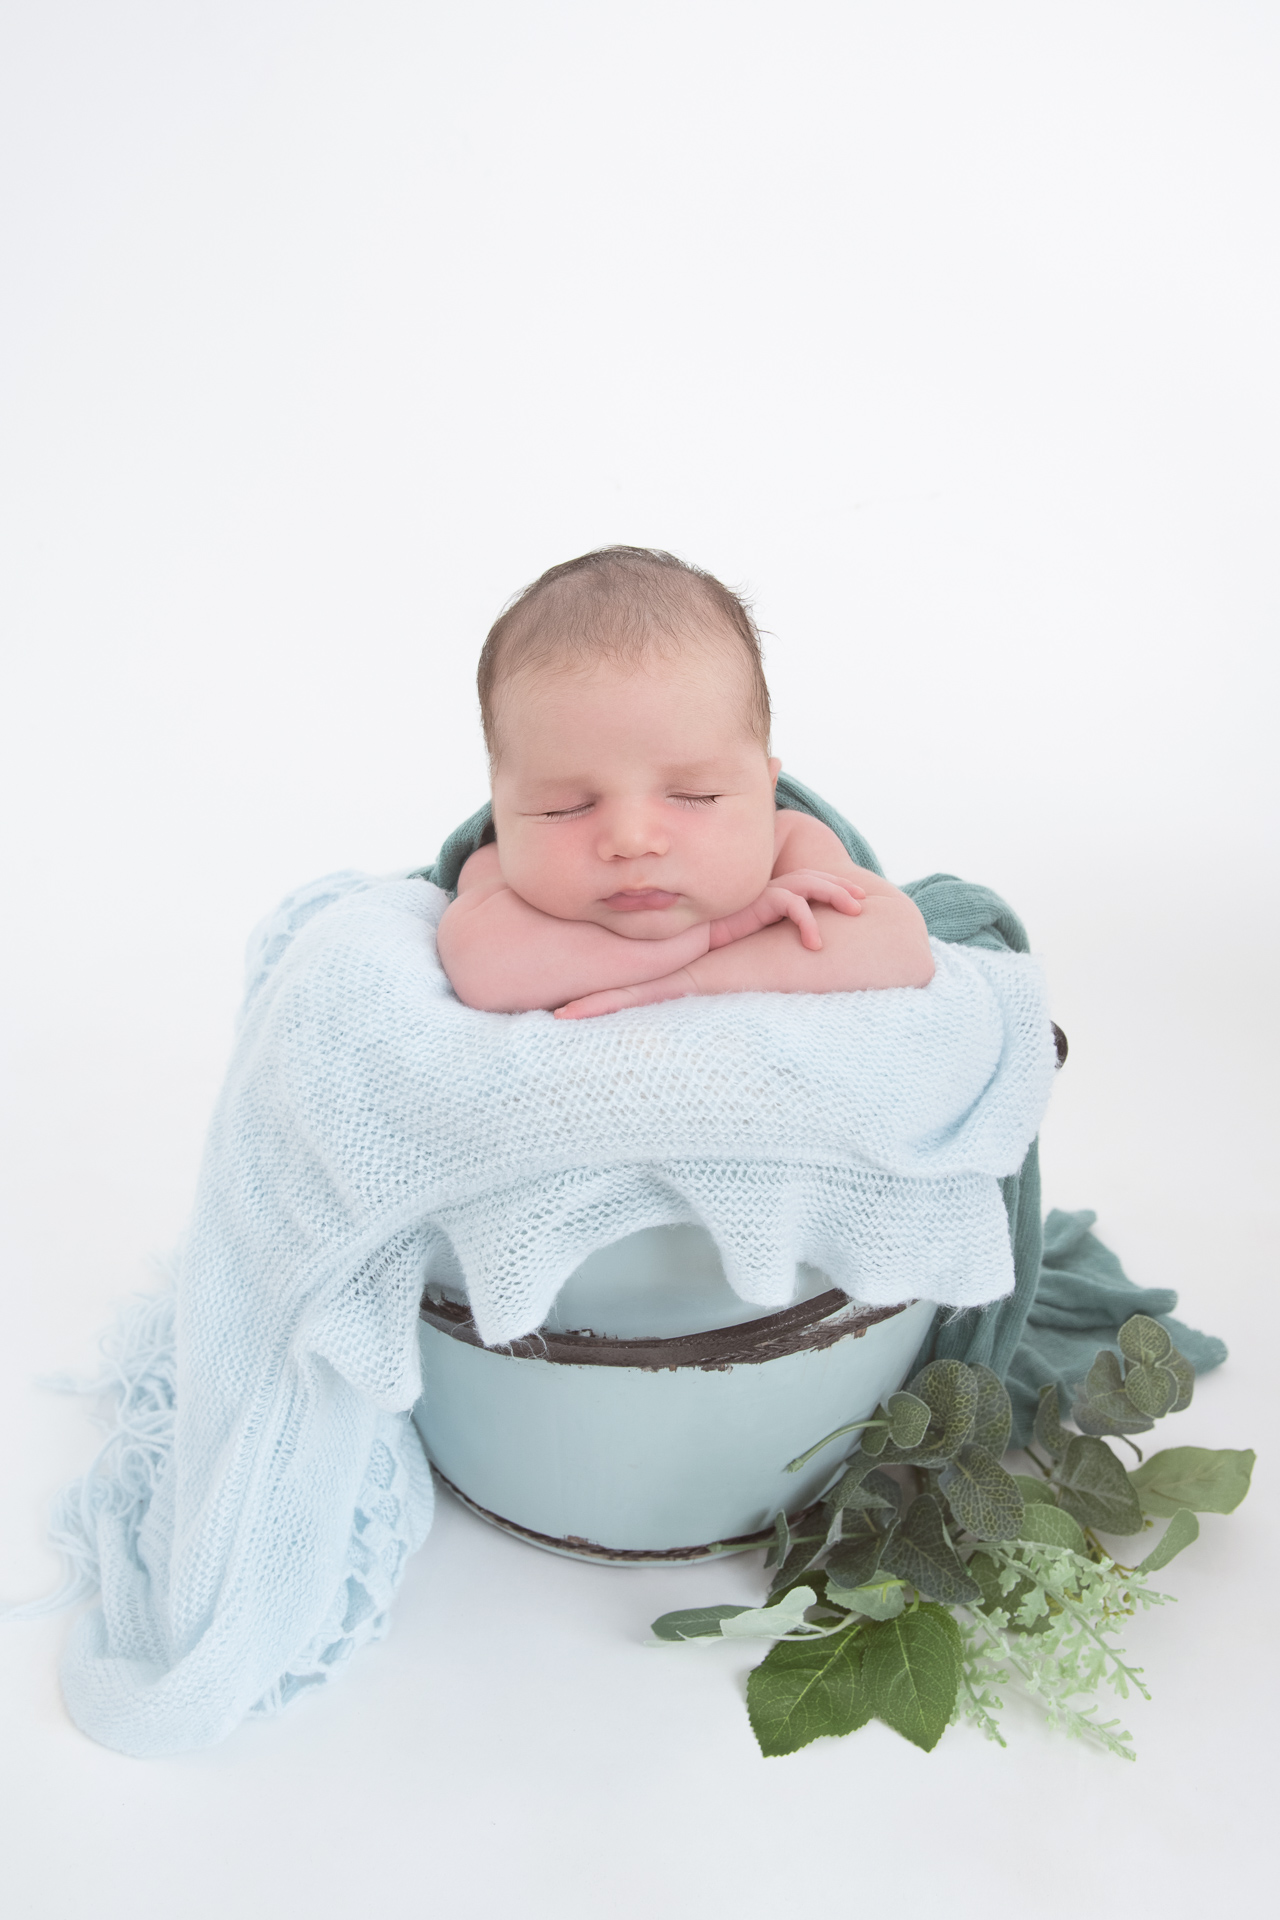 newborn rests on round prop while light blue blanket decorates the scene. White backdrop.